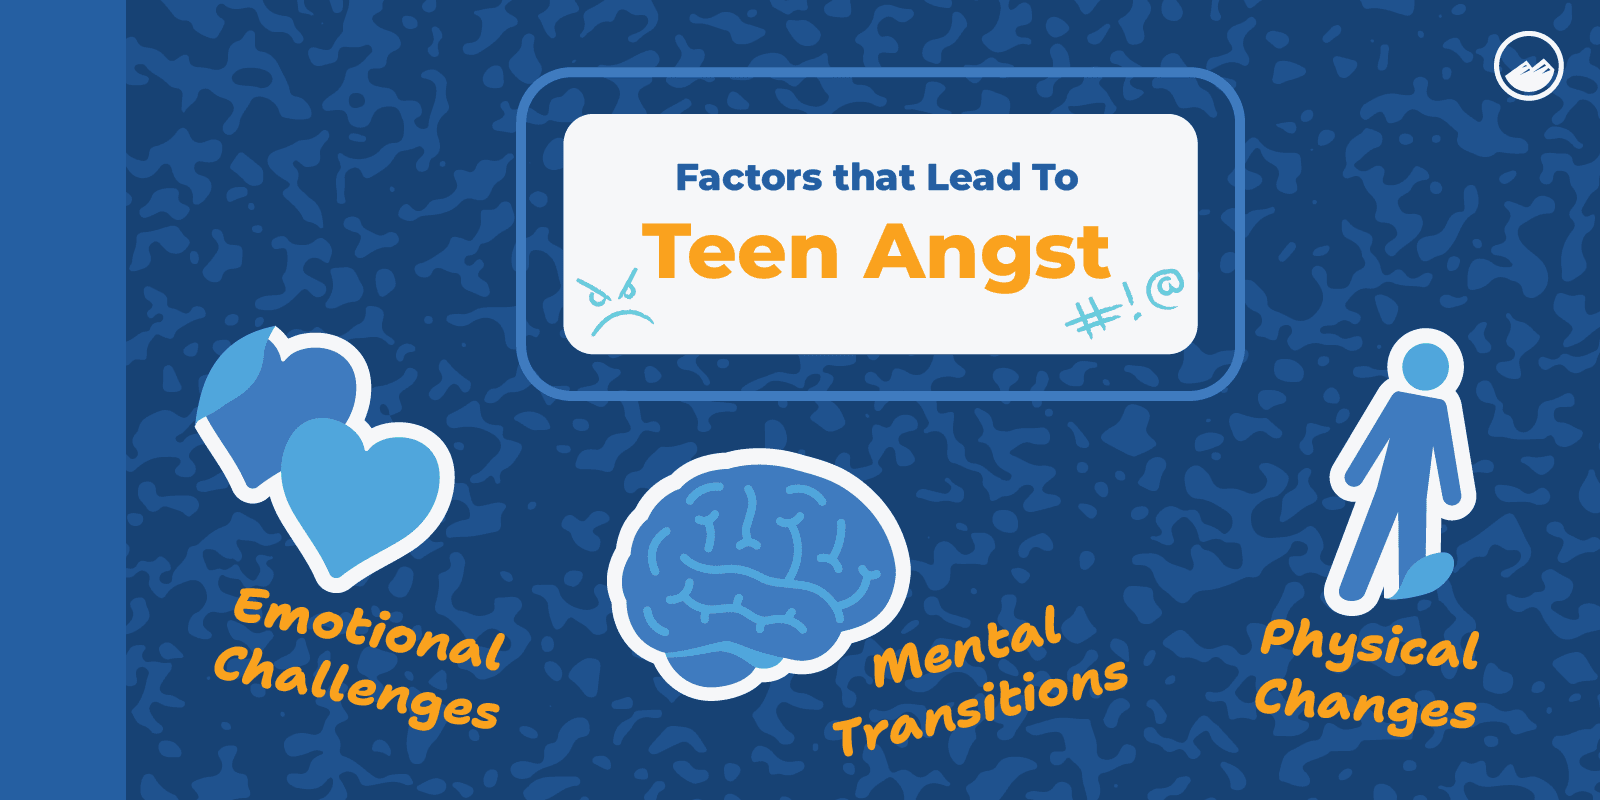 Teen Angst Graphics_01 Factors that Lead to Teen Angst Inline Image copy